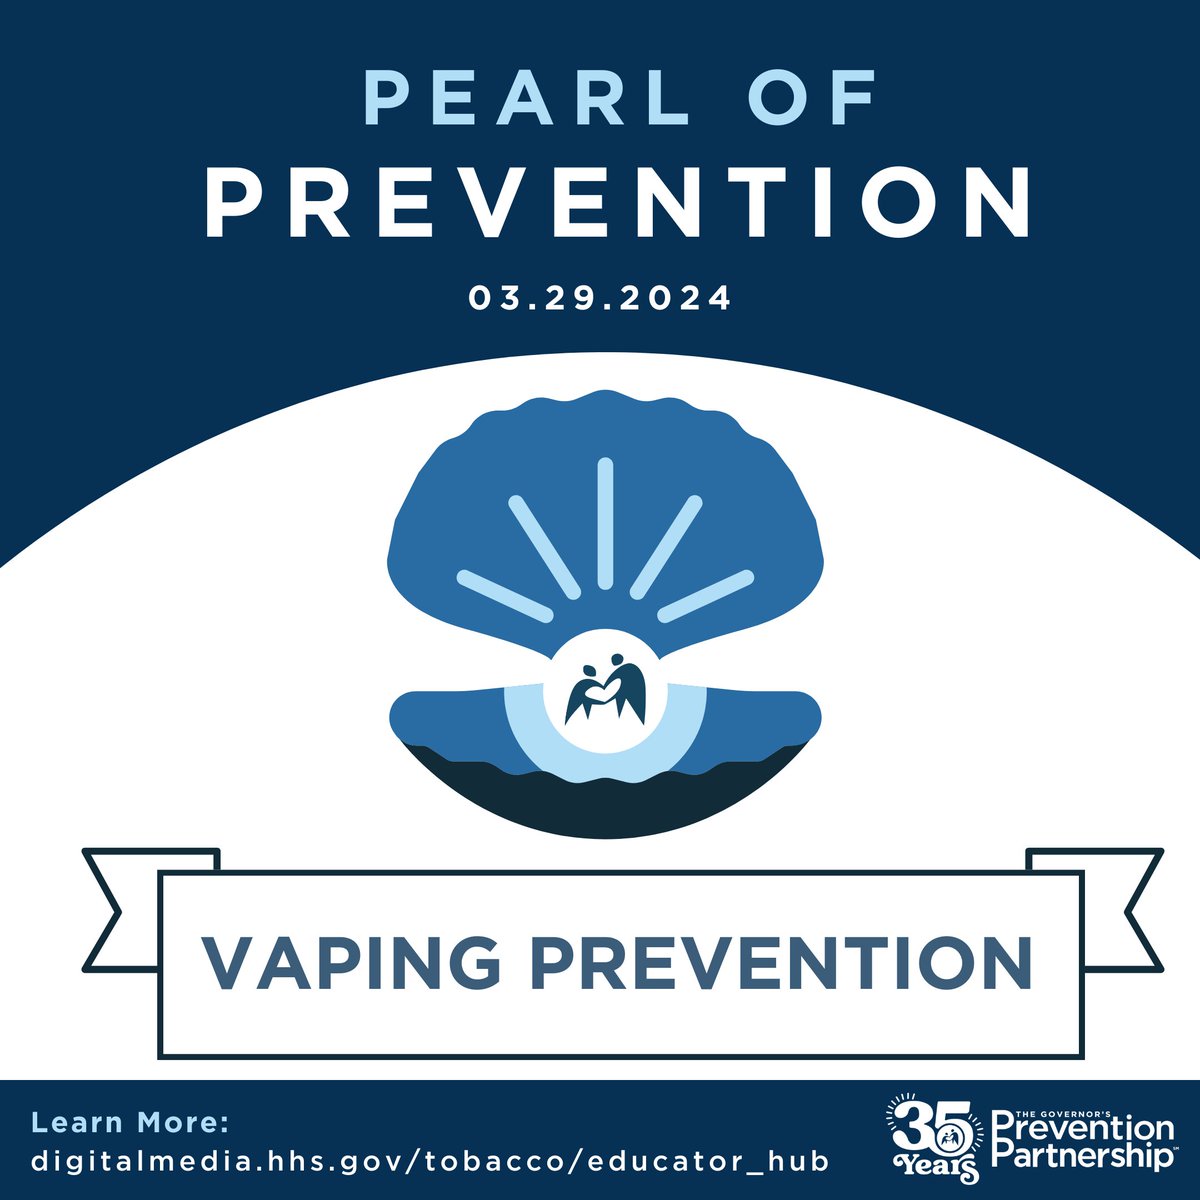 Get the facts about the dangers of vaping. FDA's free online resources offer science-based info, lesson plans, and conversation starters to help prevent youth vaping. Knowledge is power. Learn more at digitalmedia.hhs.gov/tobacco/educat….